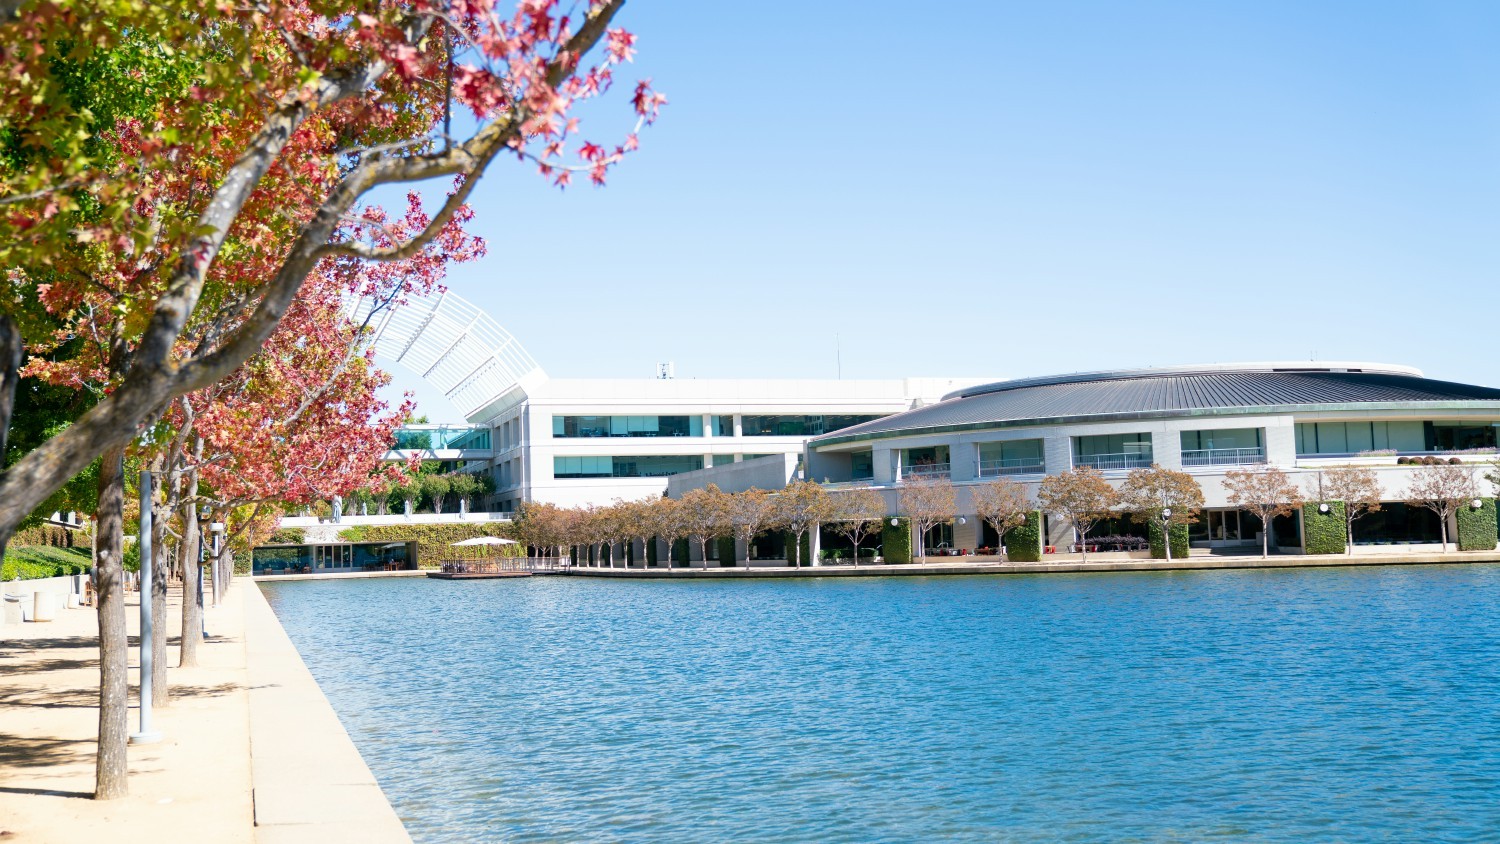 Lumin Digital is headquartered in San Ramon, CA. Employees enjoy outdoor seating, a walking trail, and transit nearby.
